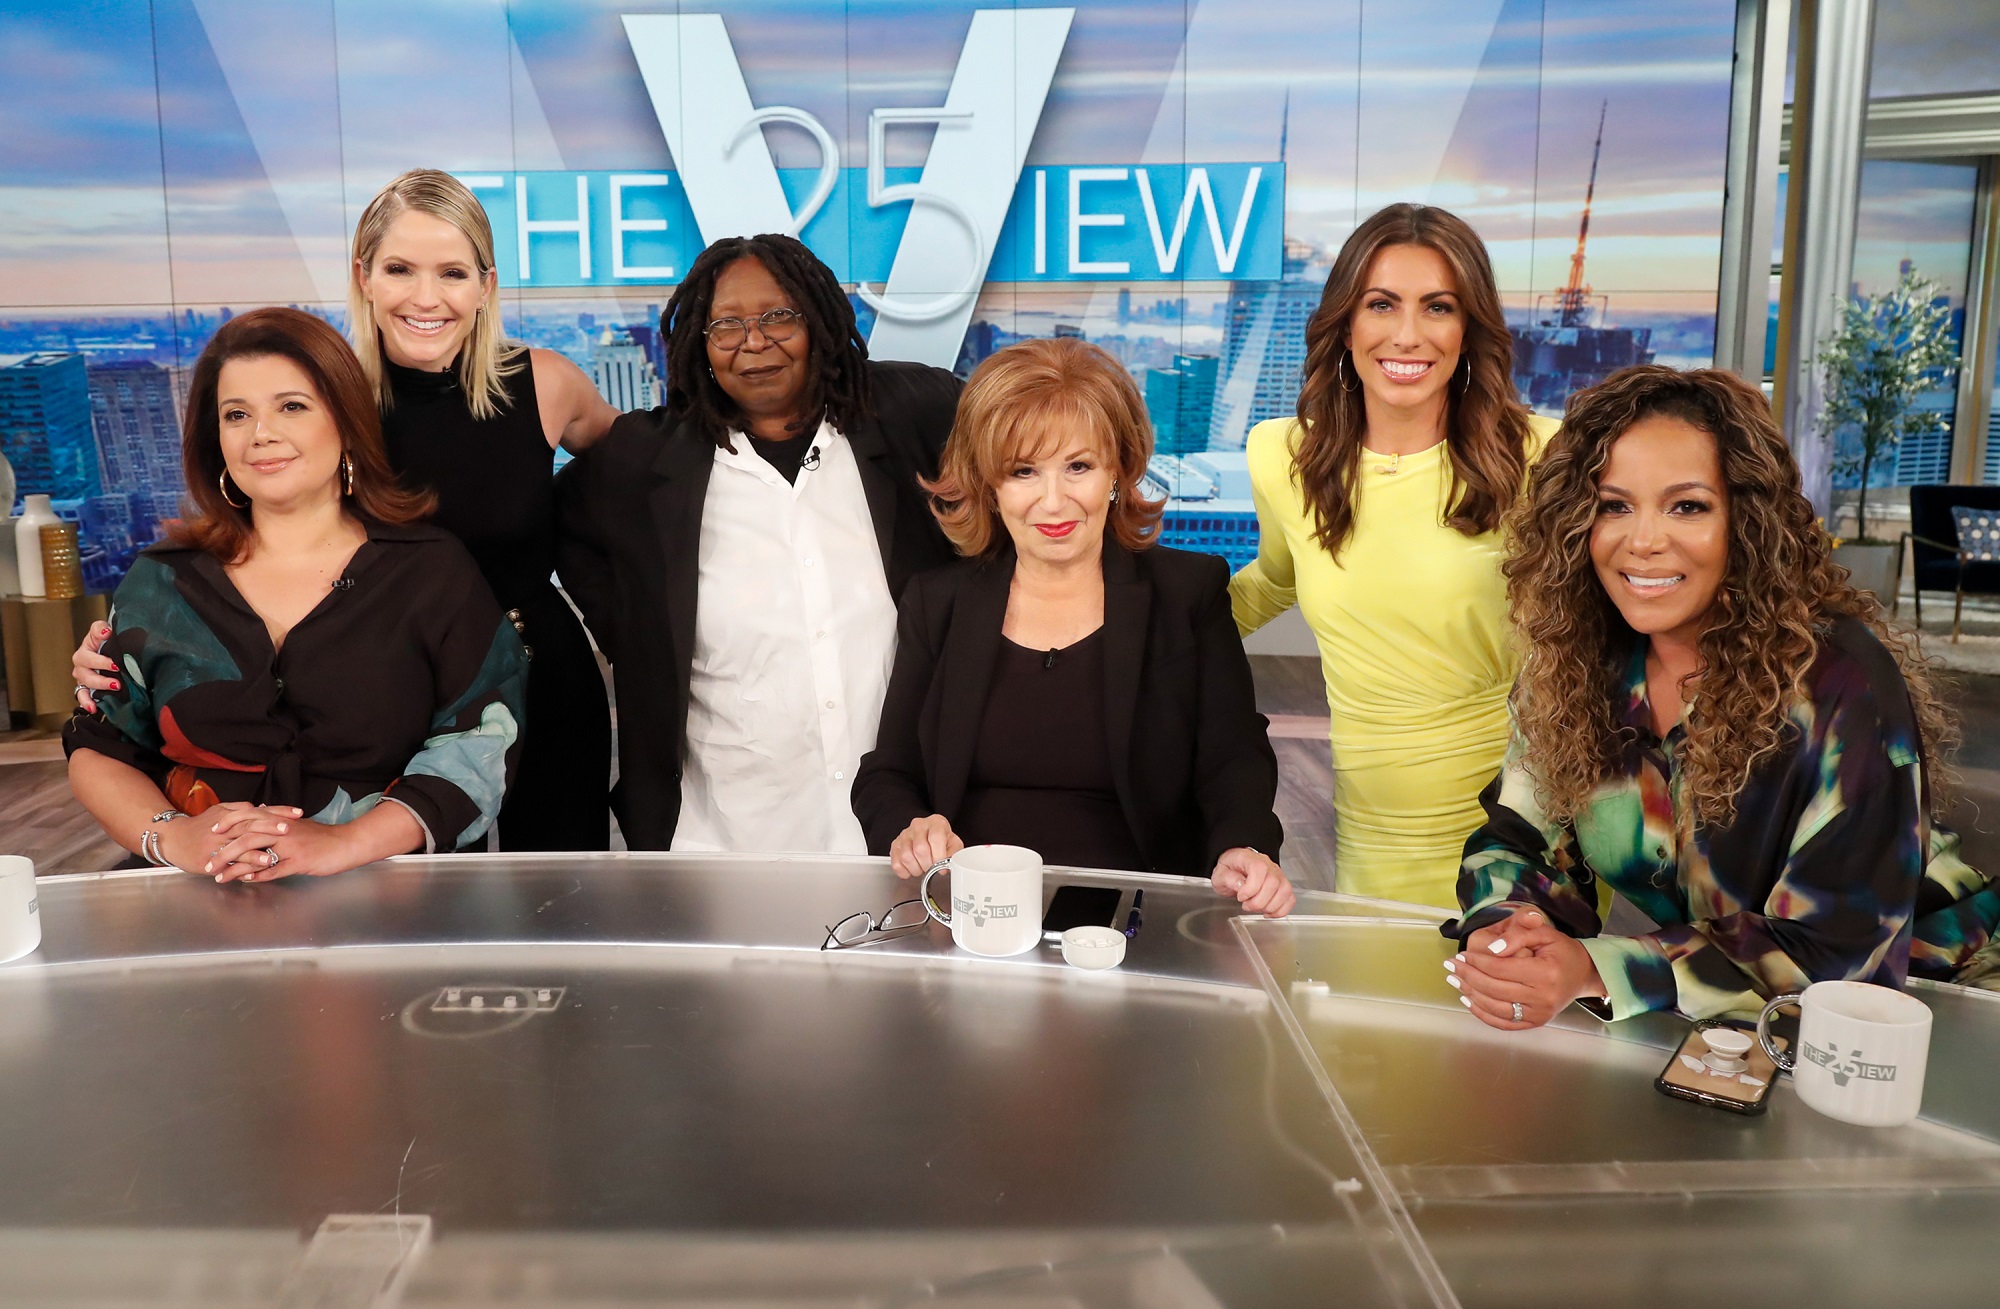 ‘The View’ Season 26: New Episodes Air in September 2022 with New Co-Hosts